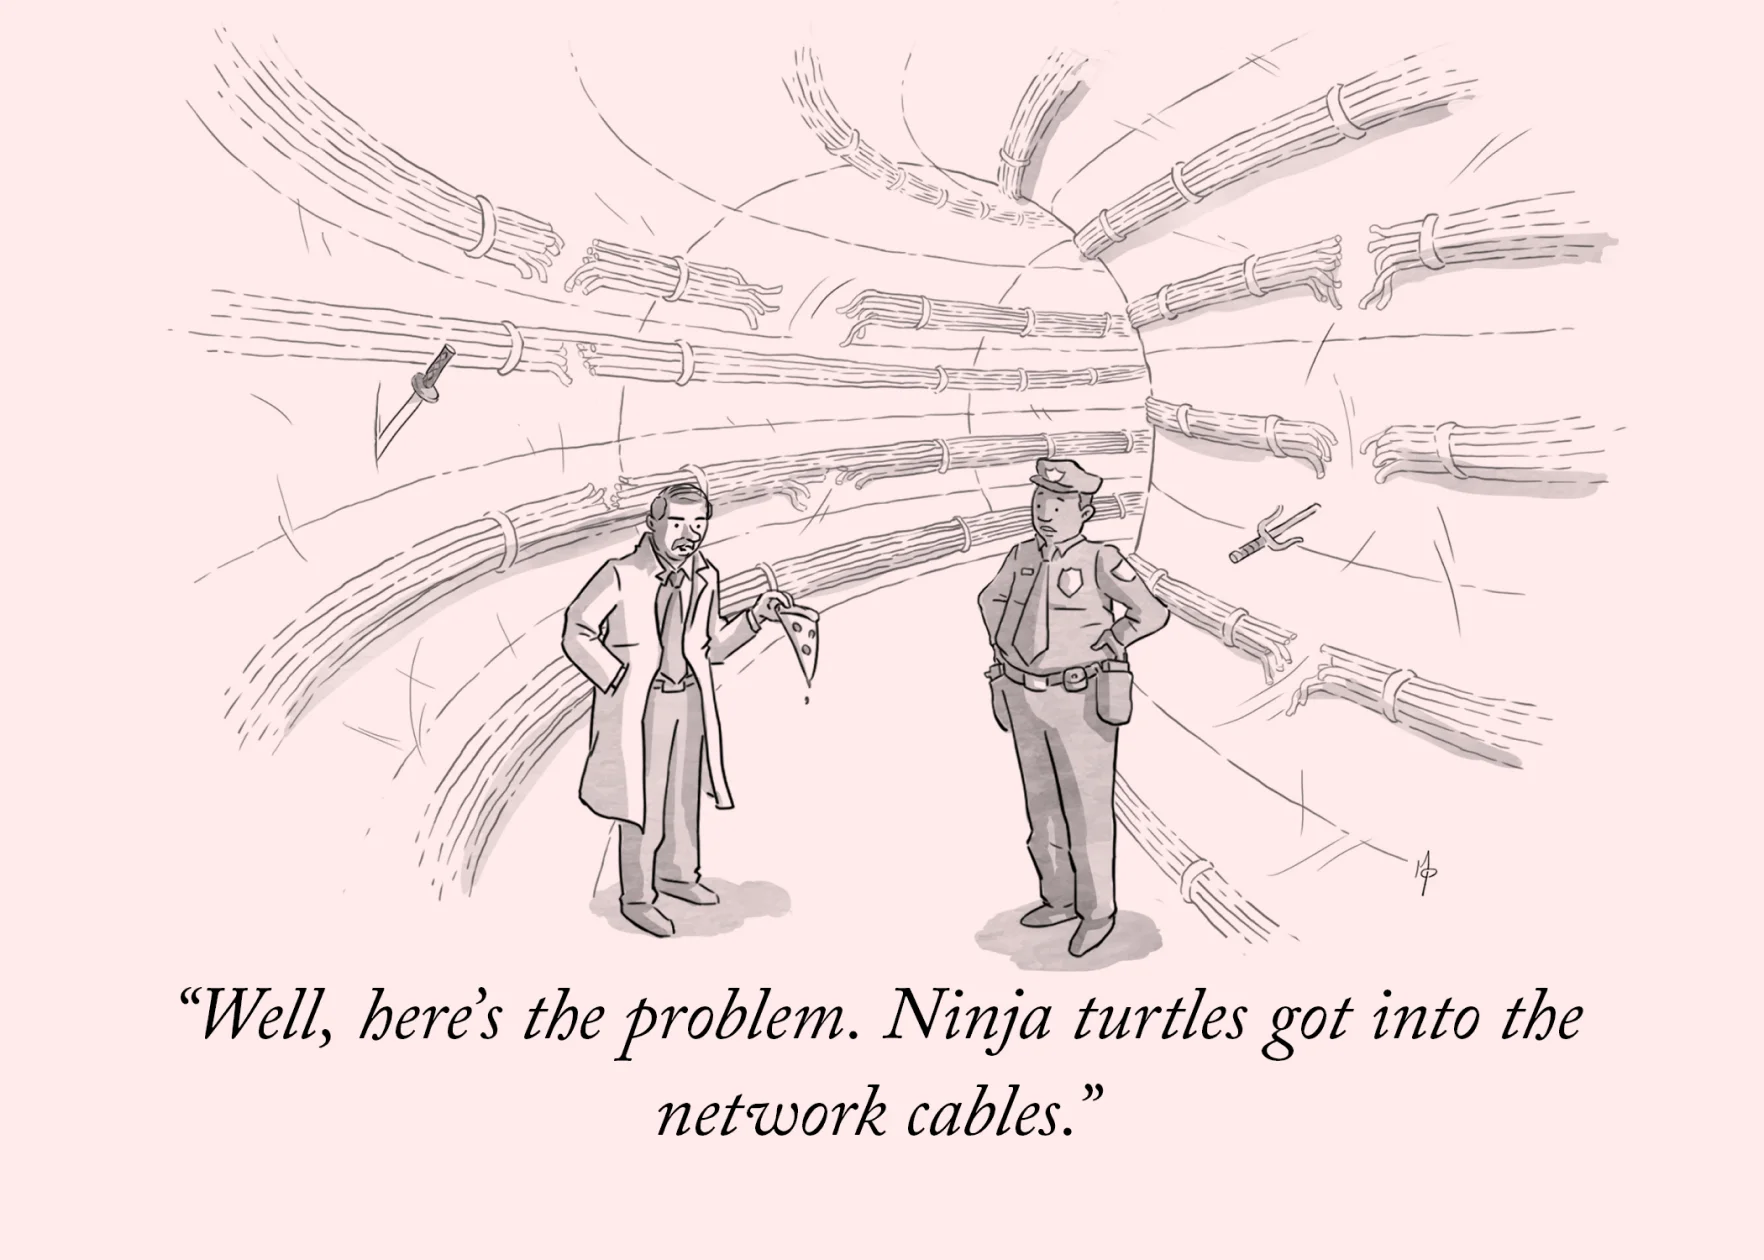 A cartoon-style illustration. A police officer and an investigator are speaking in a tunnel. The investigator is holding a slice of pizza. The caption reads: Well, heres the problem. Ninja turtles got into the network cables.